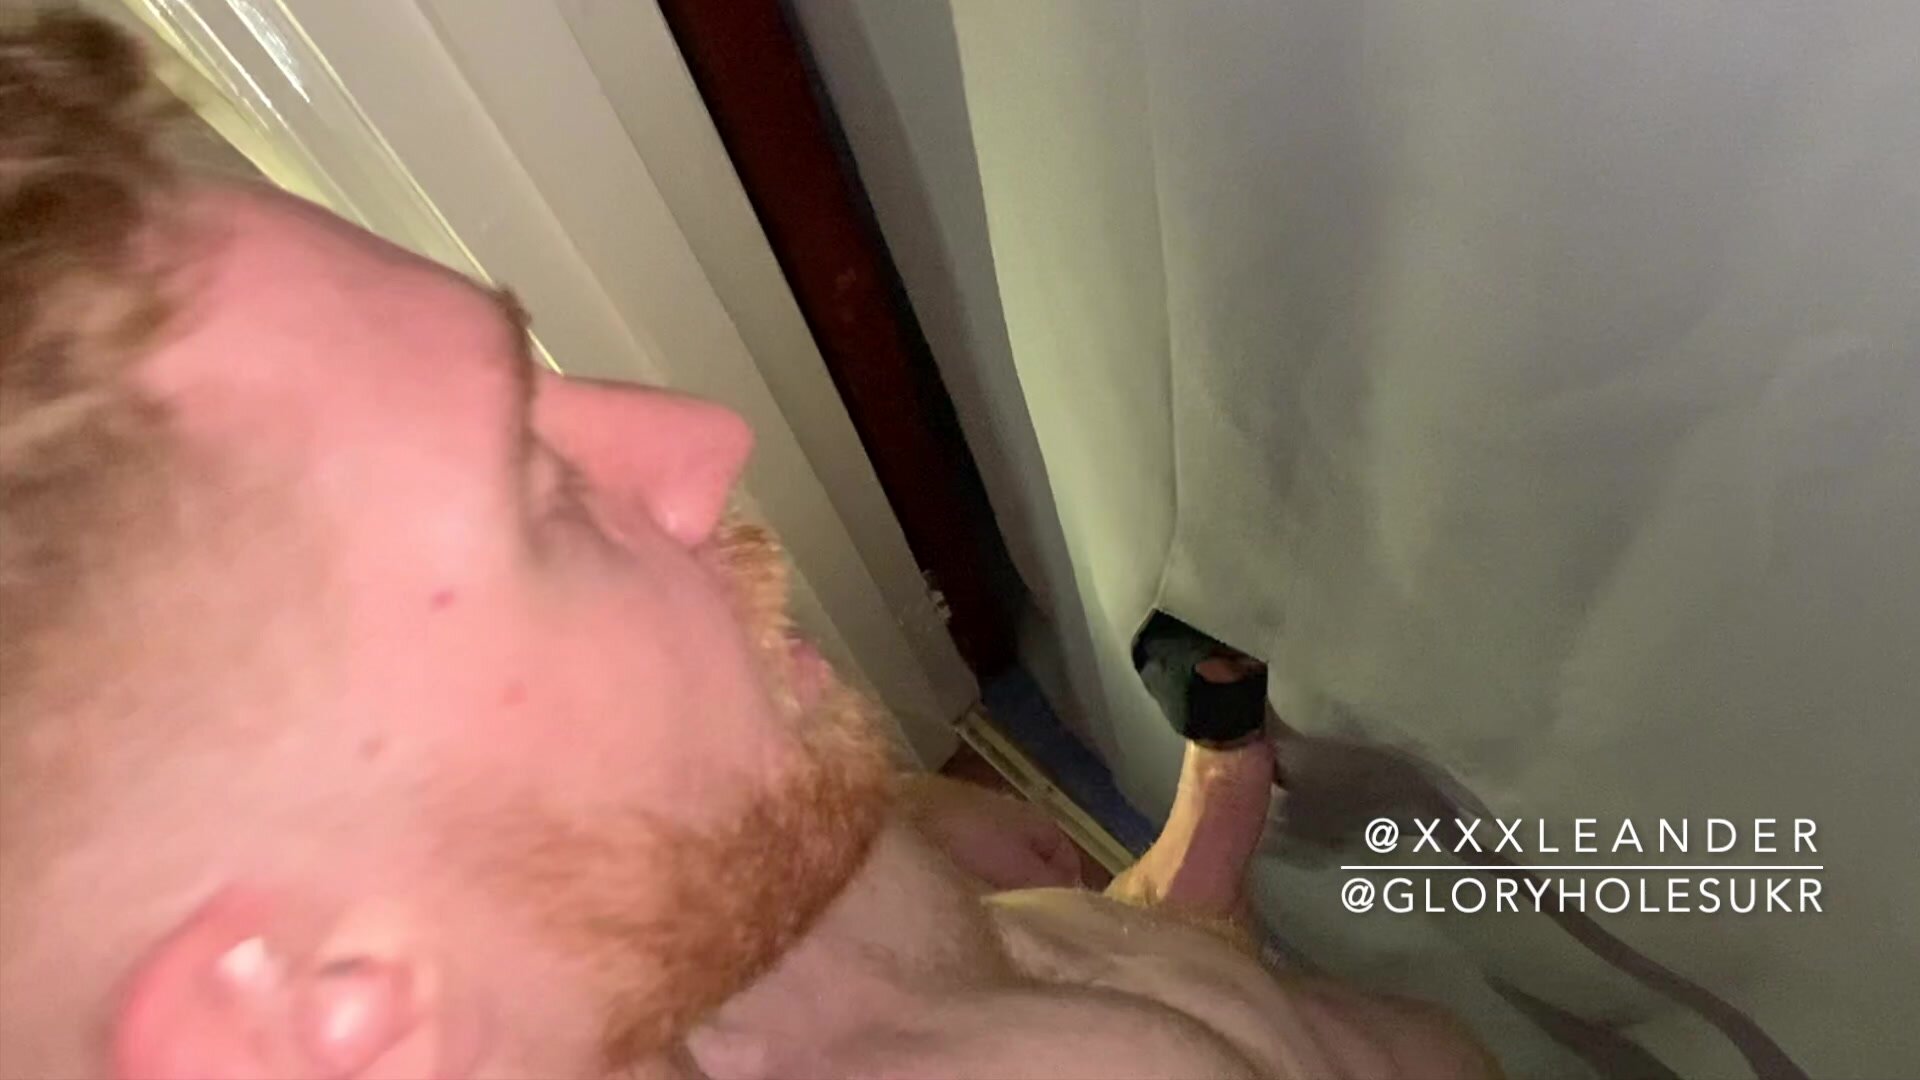 glory hole fun with hot ginger